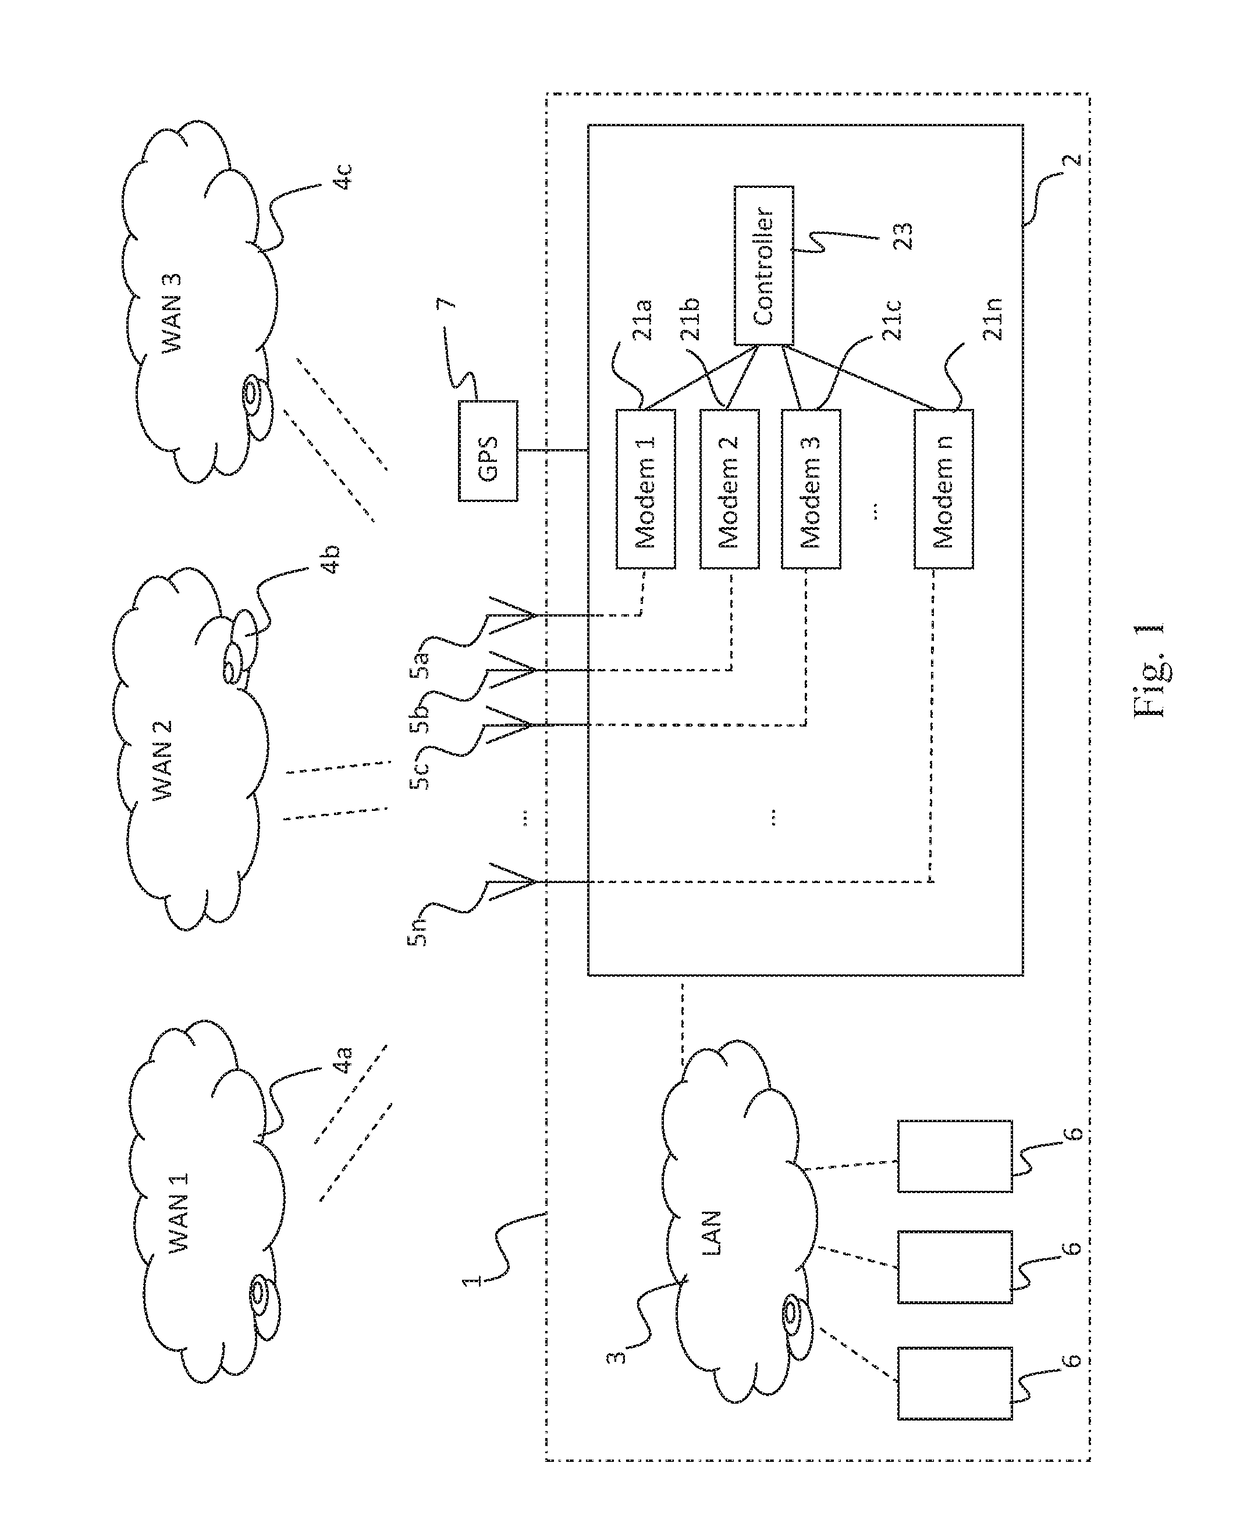 Method and system for bandwidth constrained media streaming to a moving vehicle